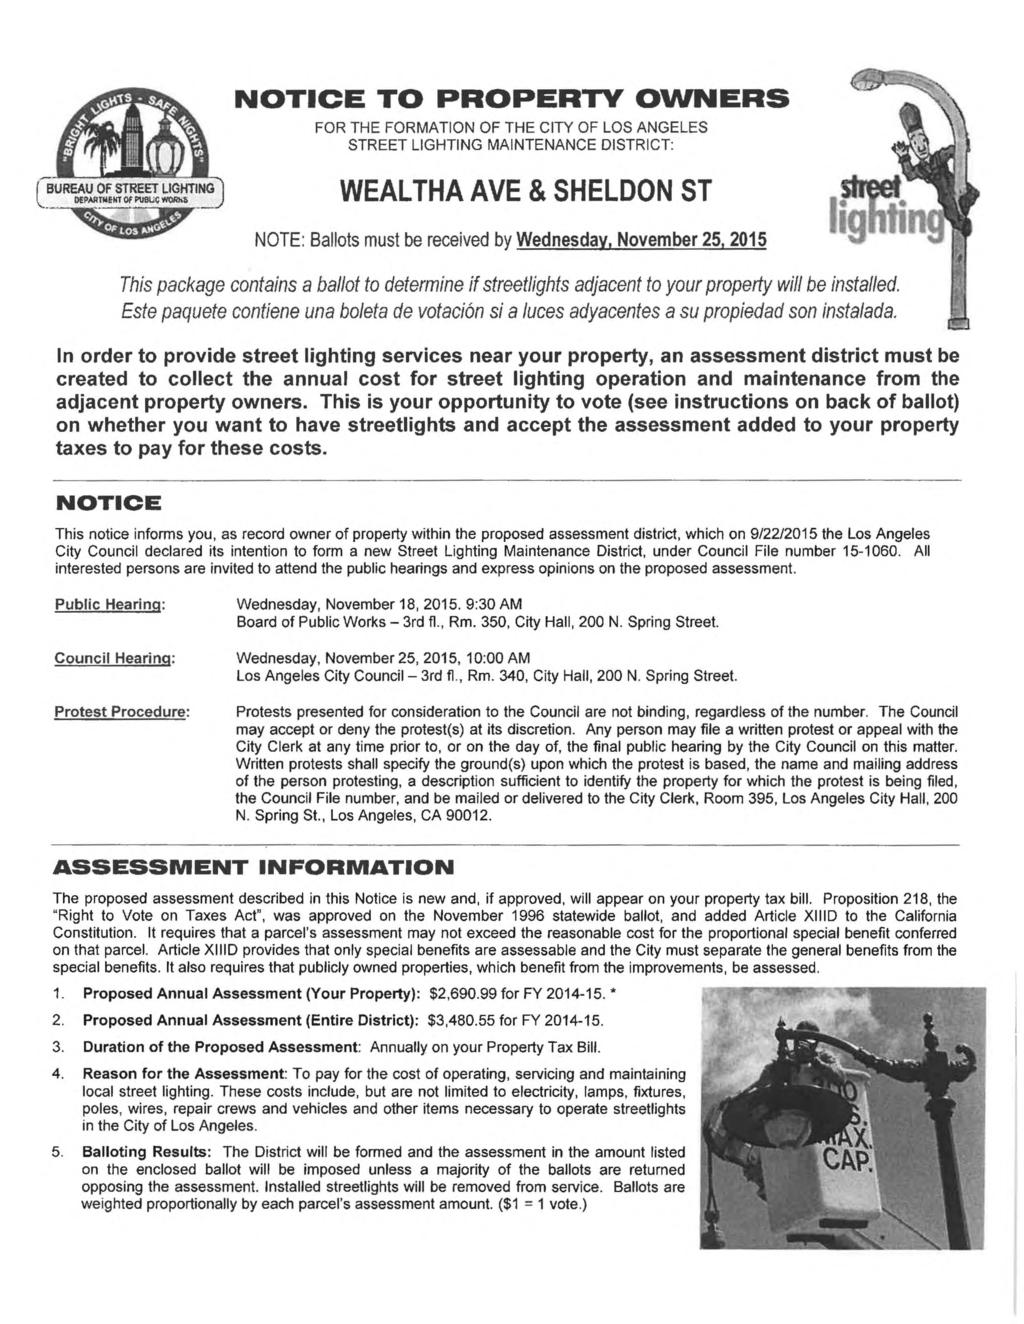 NOTICE TO PROPERTY OWNERS FOR THE FORMATION OF THE CITY OF LOS ANGELES STREET LIGHTING MAINTENANCE DISTRICT: f BUREAU OF STREET LIGHTING") DEPARTMENT Of PUBLIC WORKS J WEALTHA AVE & SHELDON ST NOTE: